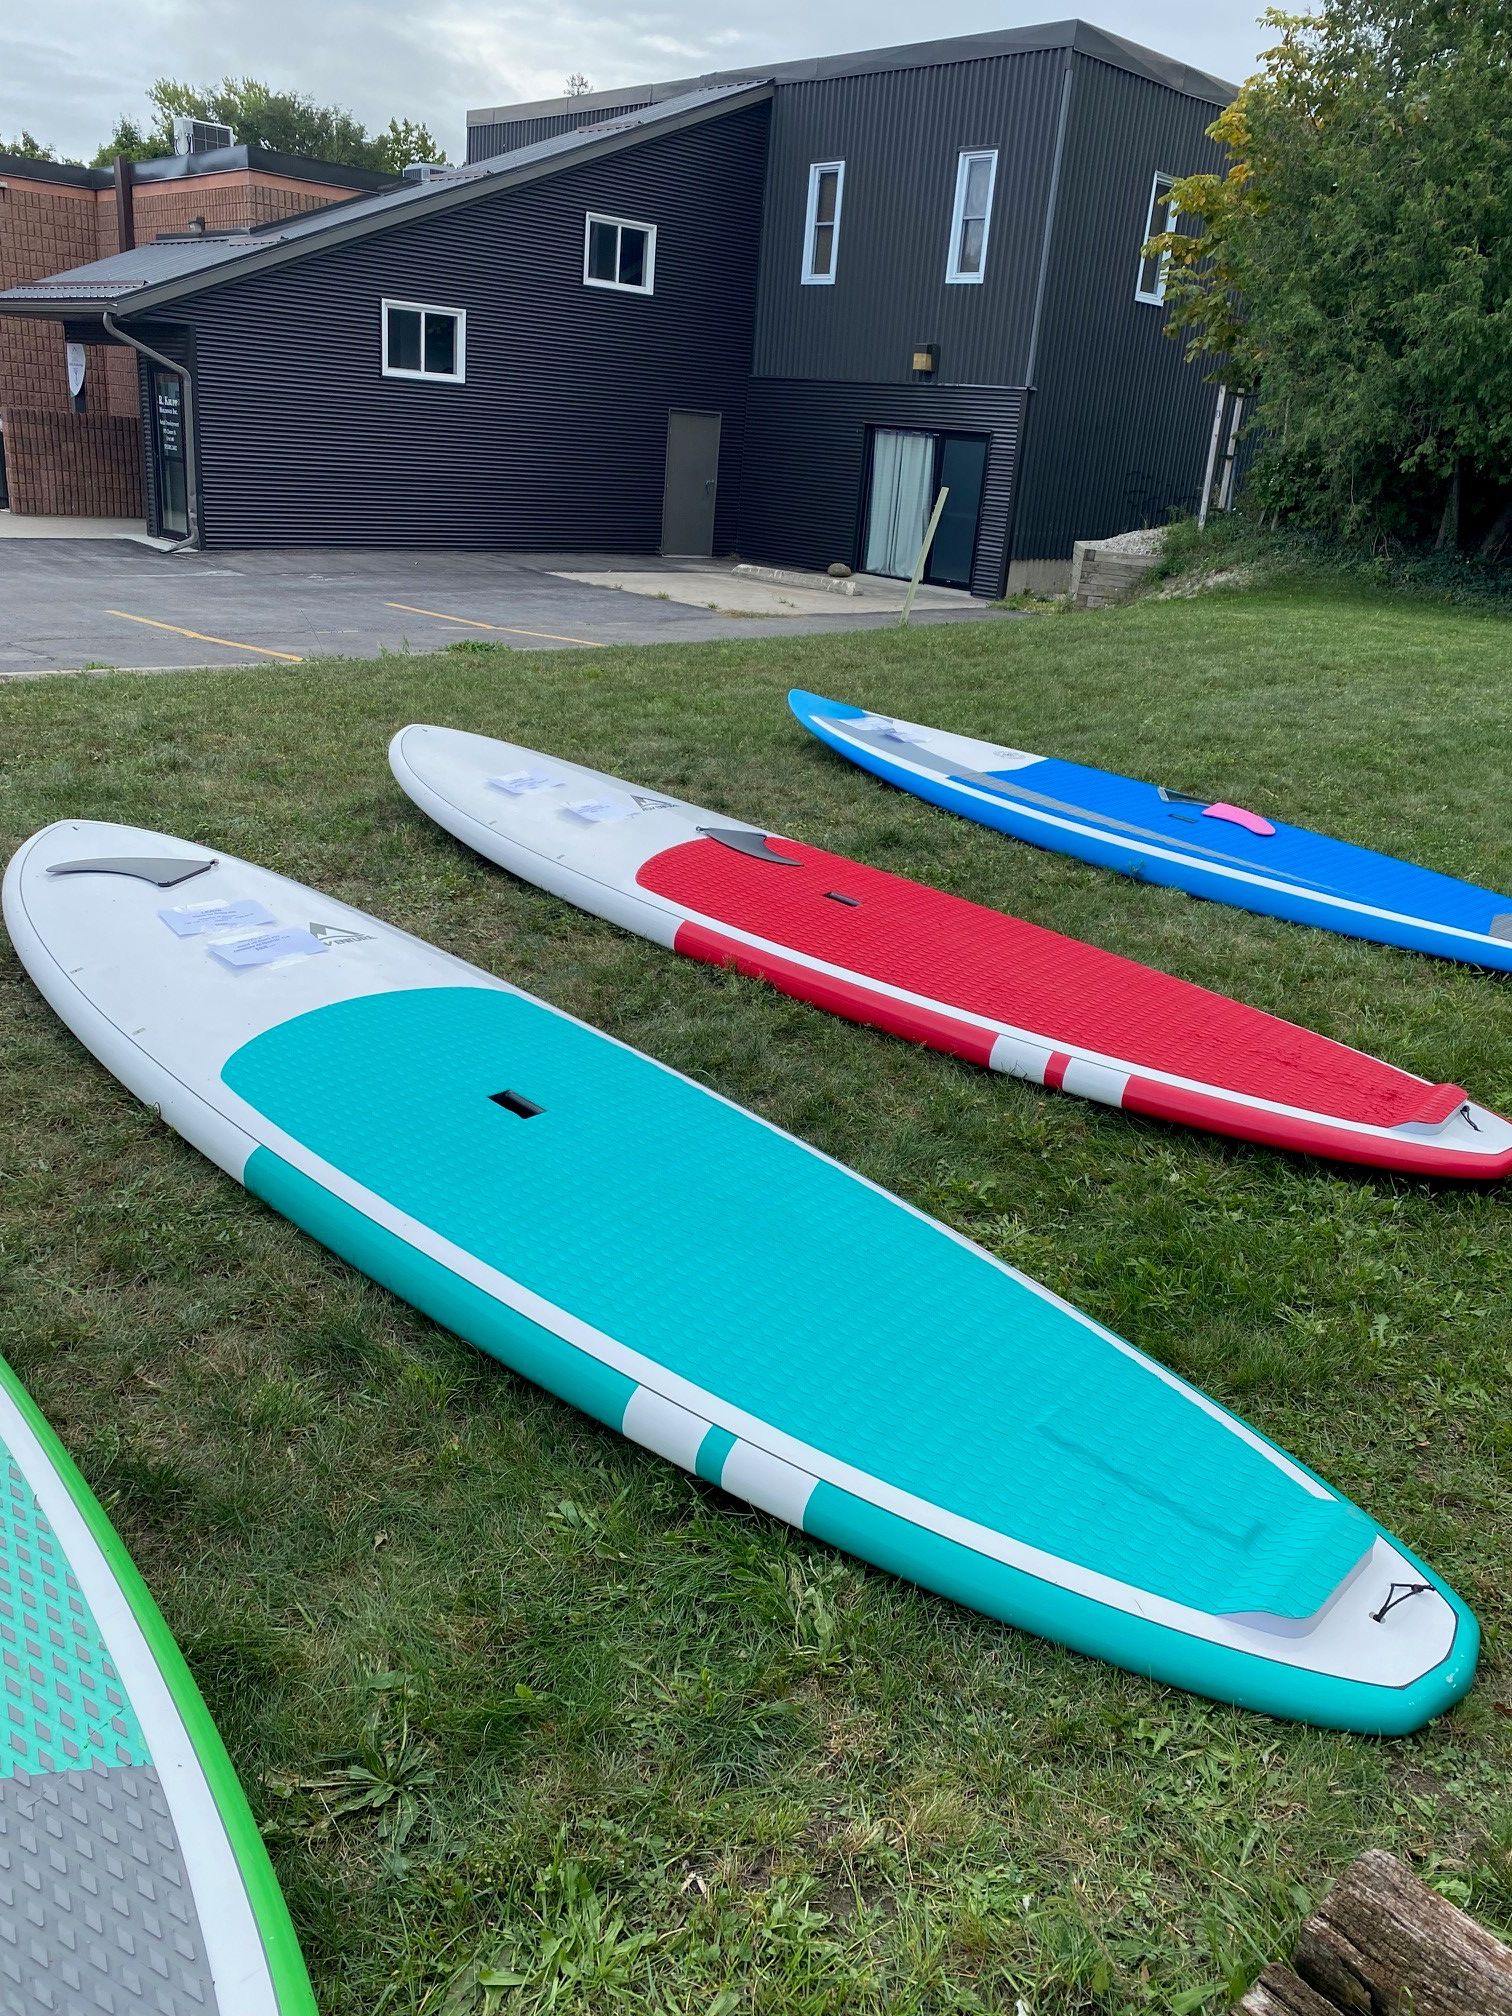 Paddle boards laid out on grass for sale 